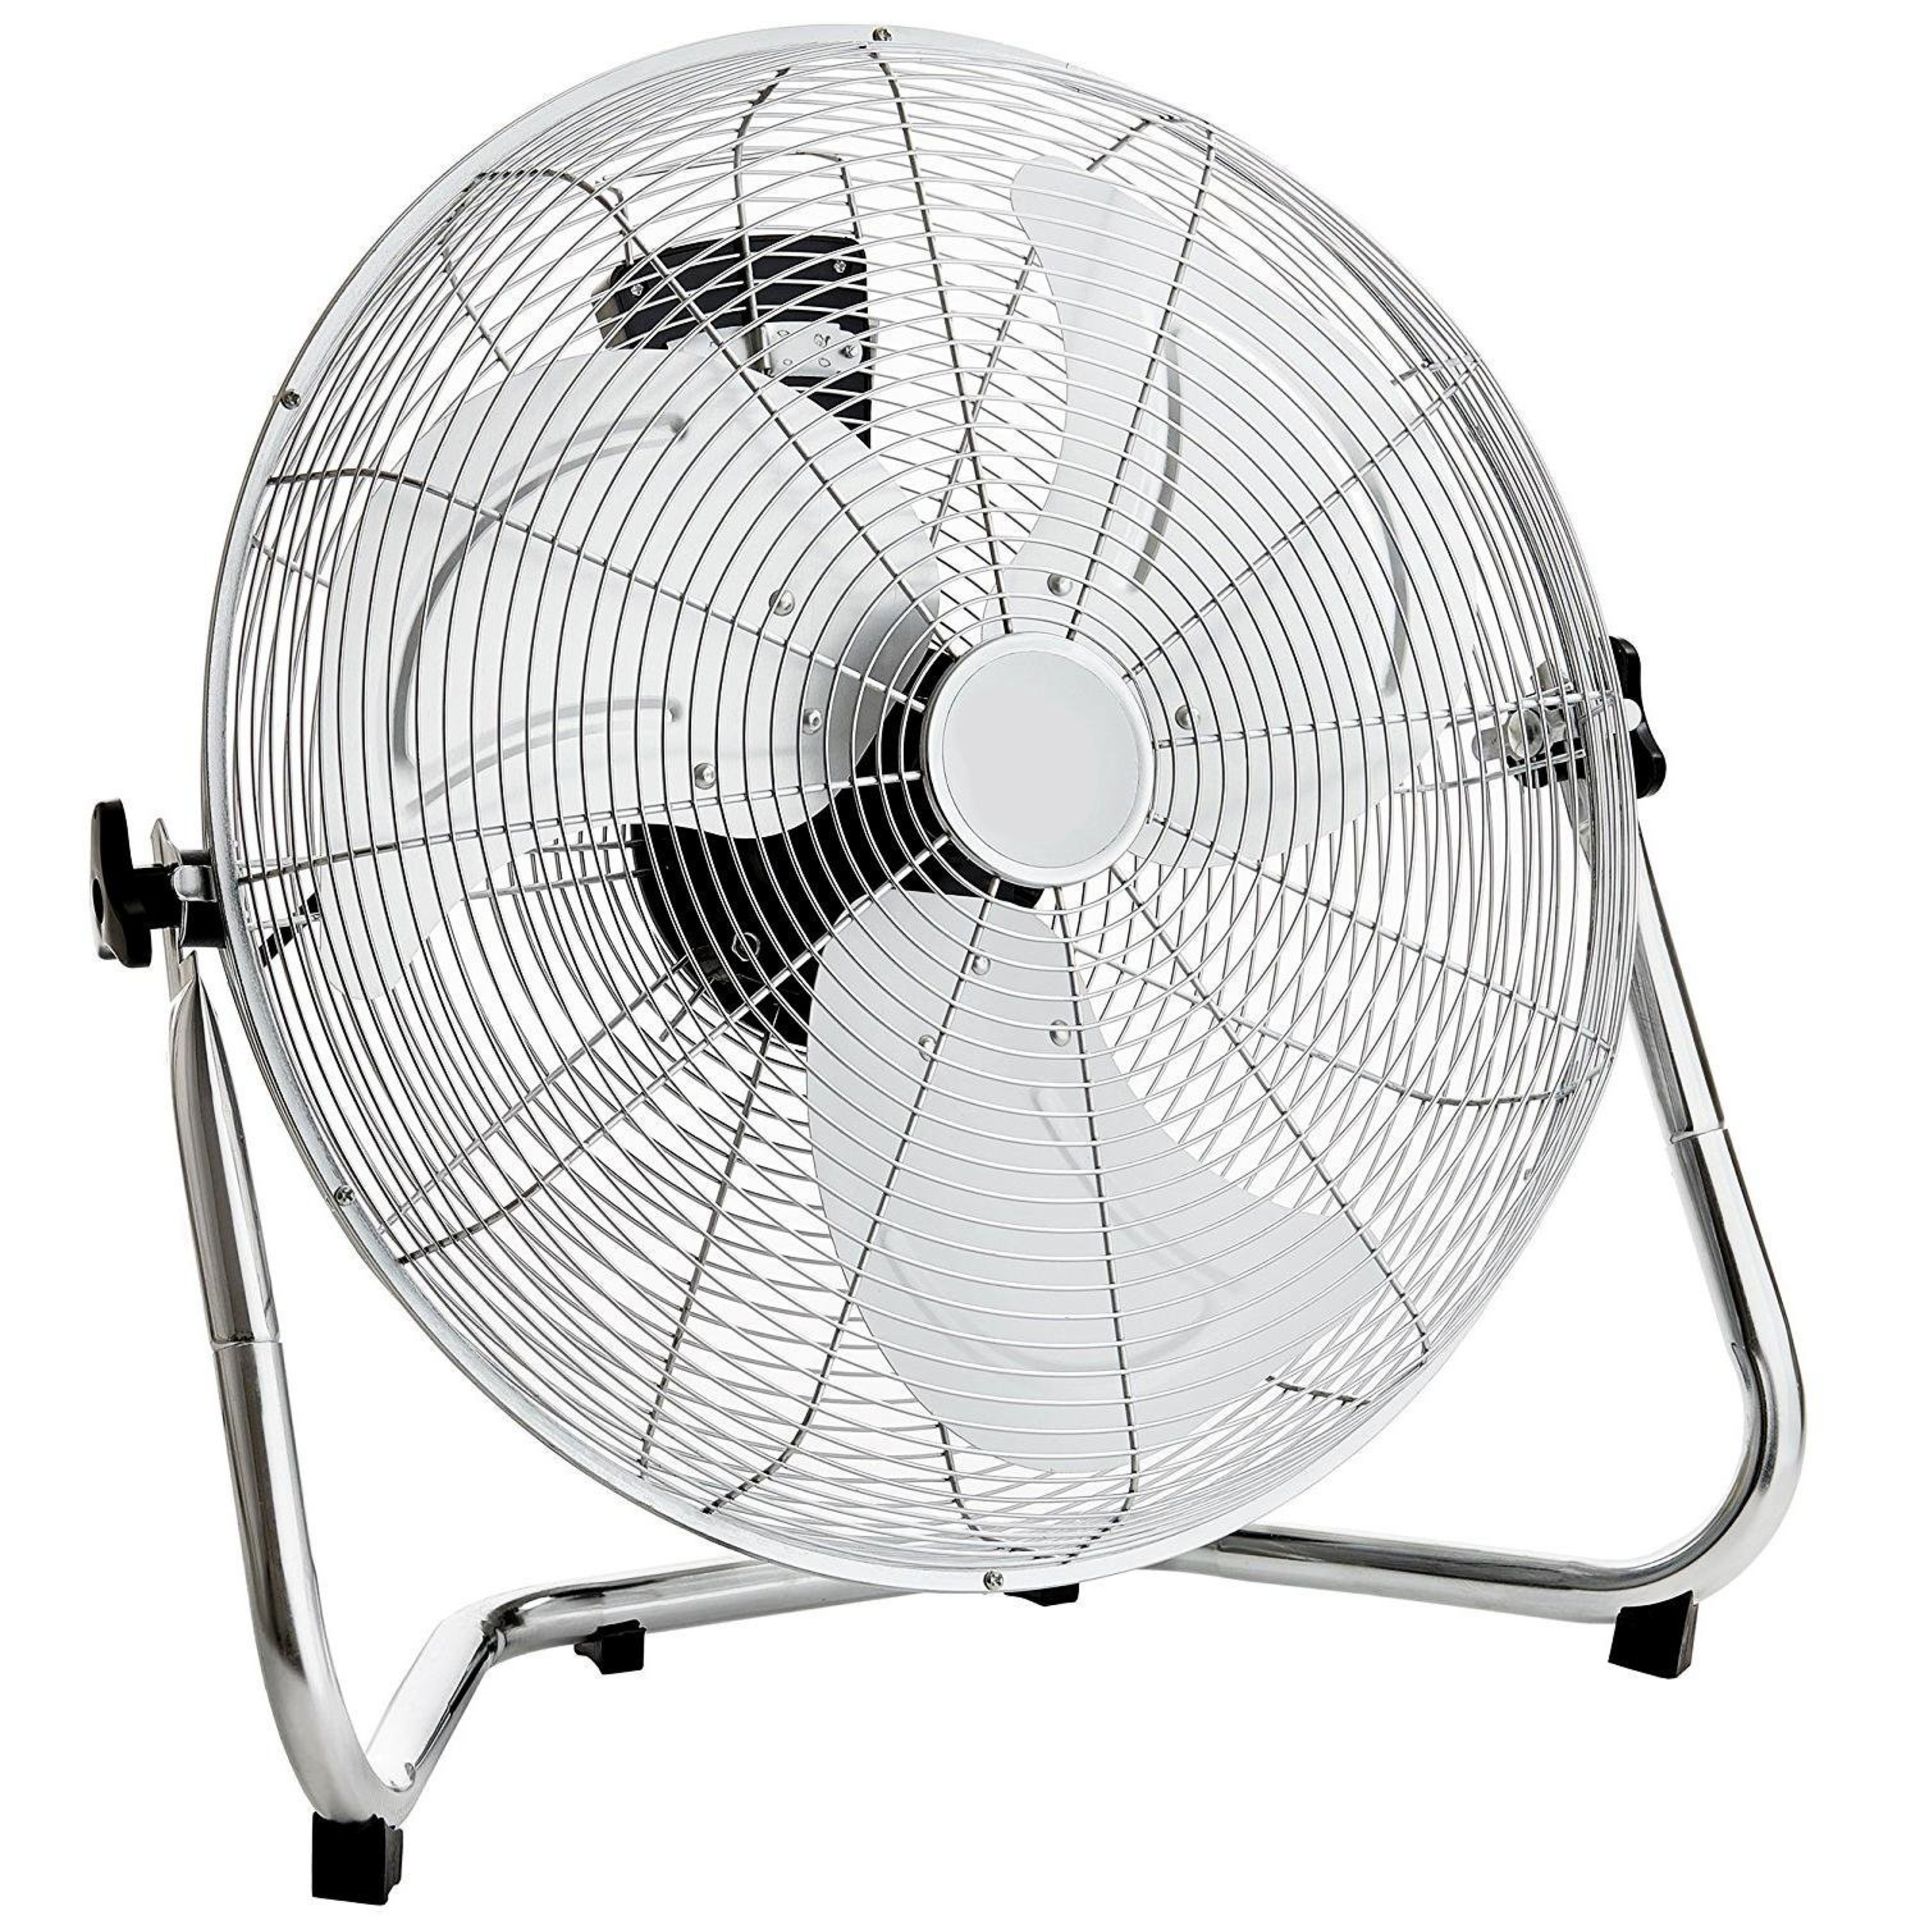 (D21) 18" Chrome 3 Speed Free Standing Gym Fan 3 Speed Push Button Speed Control Fixed Positi...